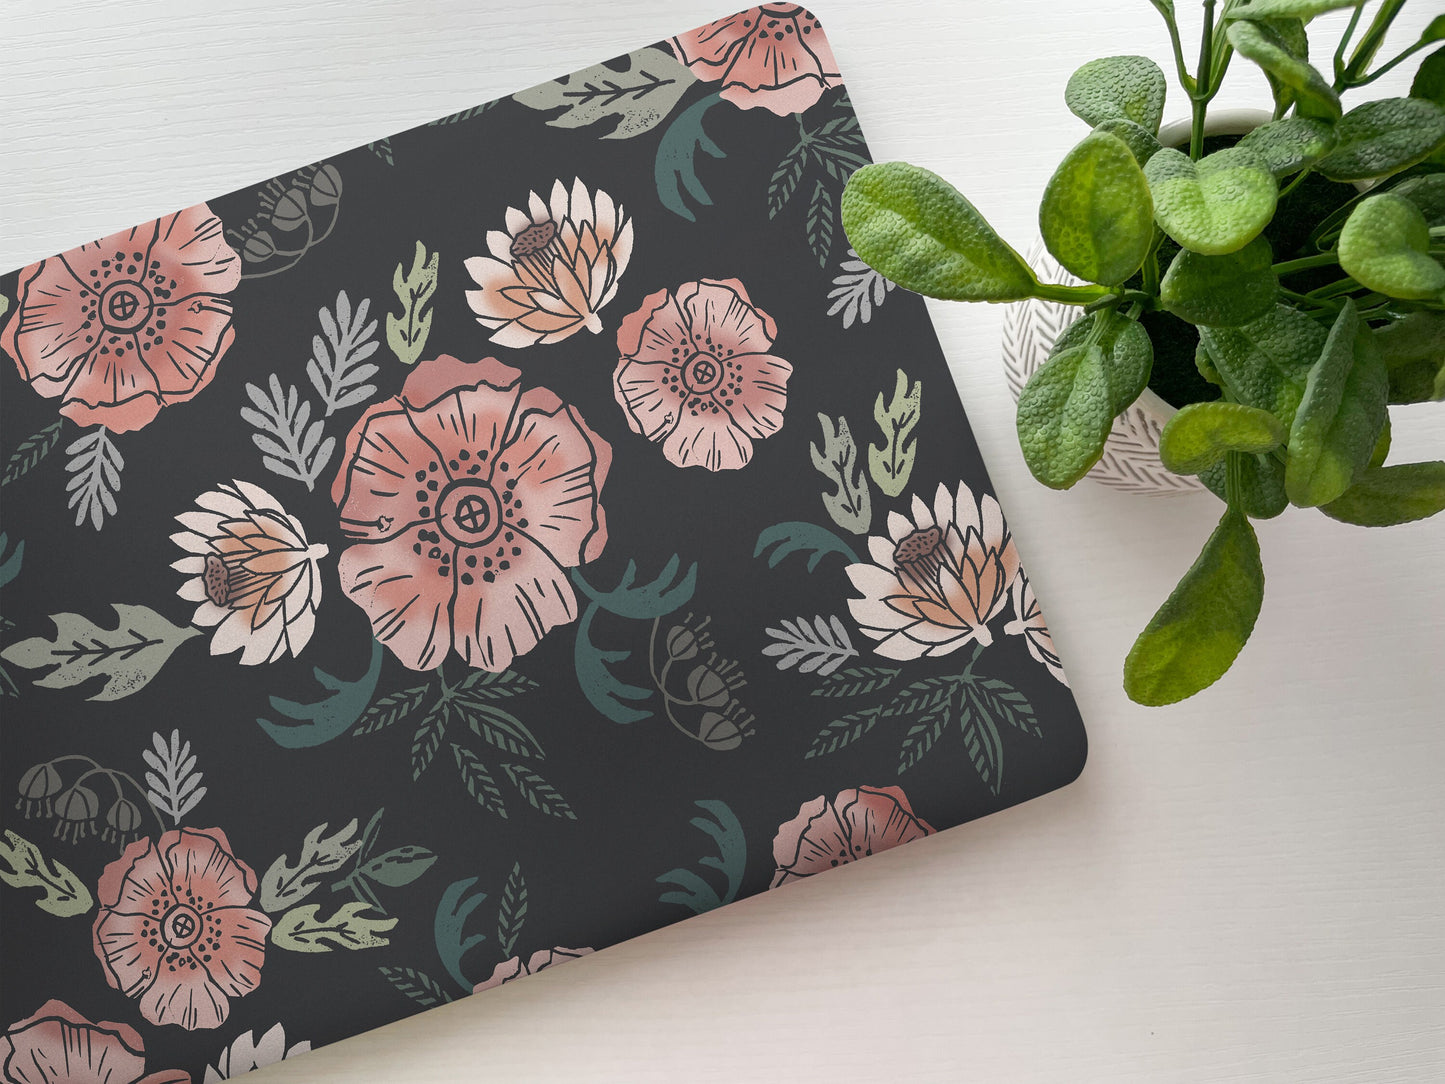 Floral Laptop Skin, Laptop Cover, Laptop Skins, Removable Laptop Skins, Laptop Decal, Customized Laptop Accessories, Laptop Stickers, 32 - James & Inks